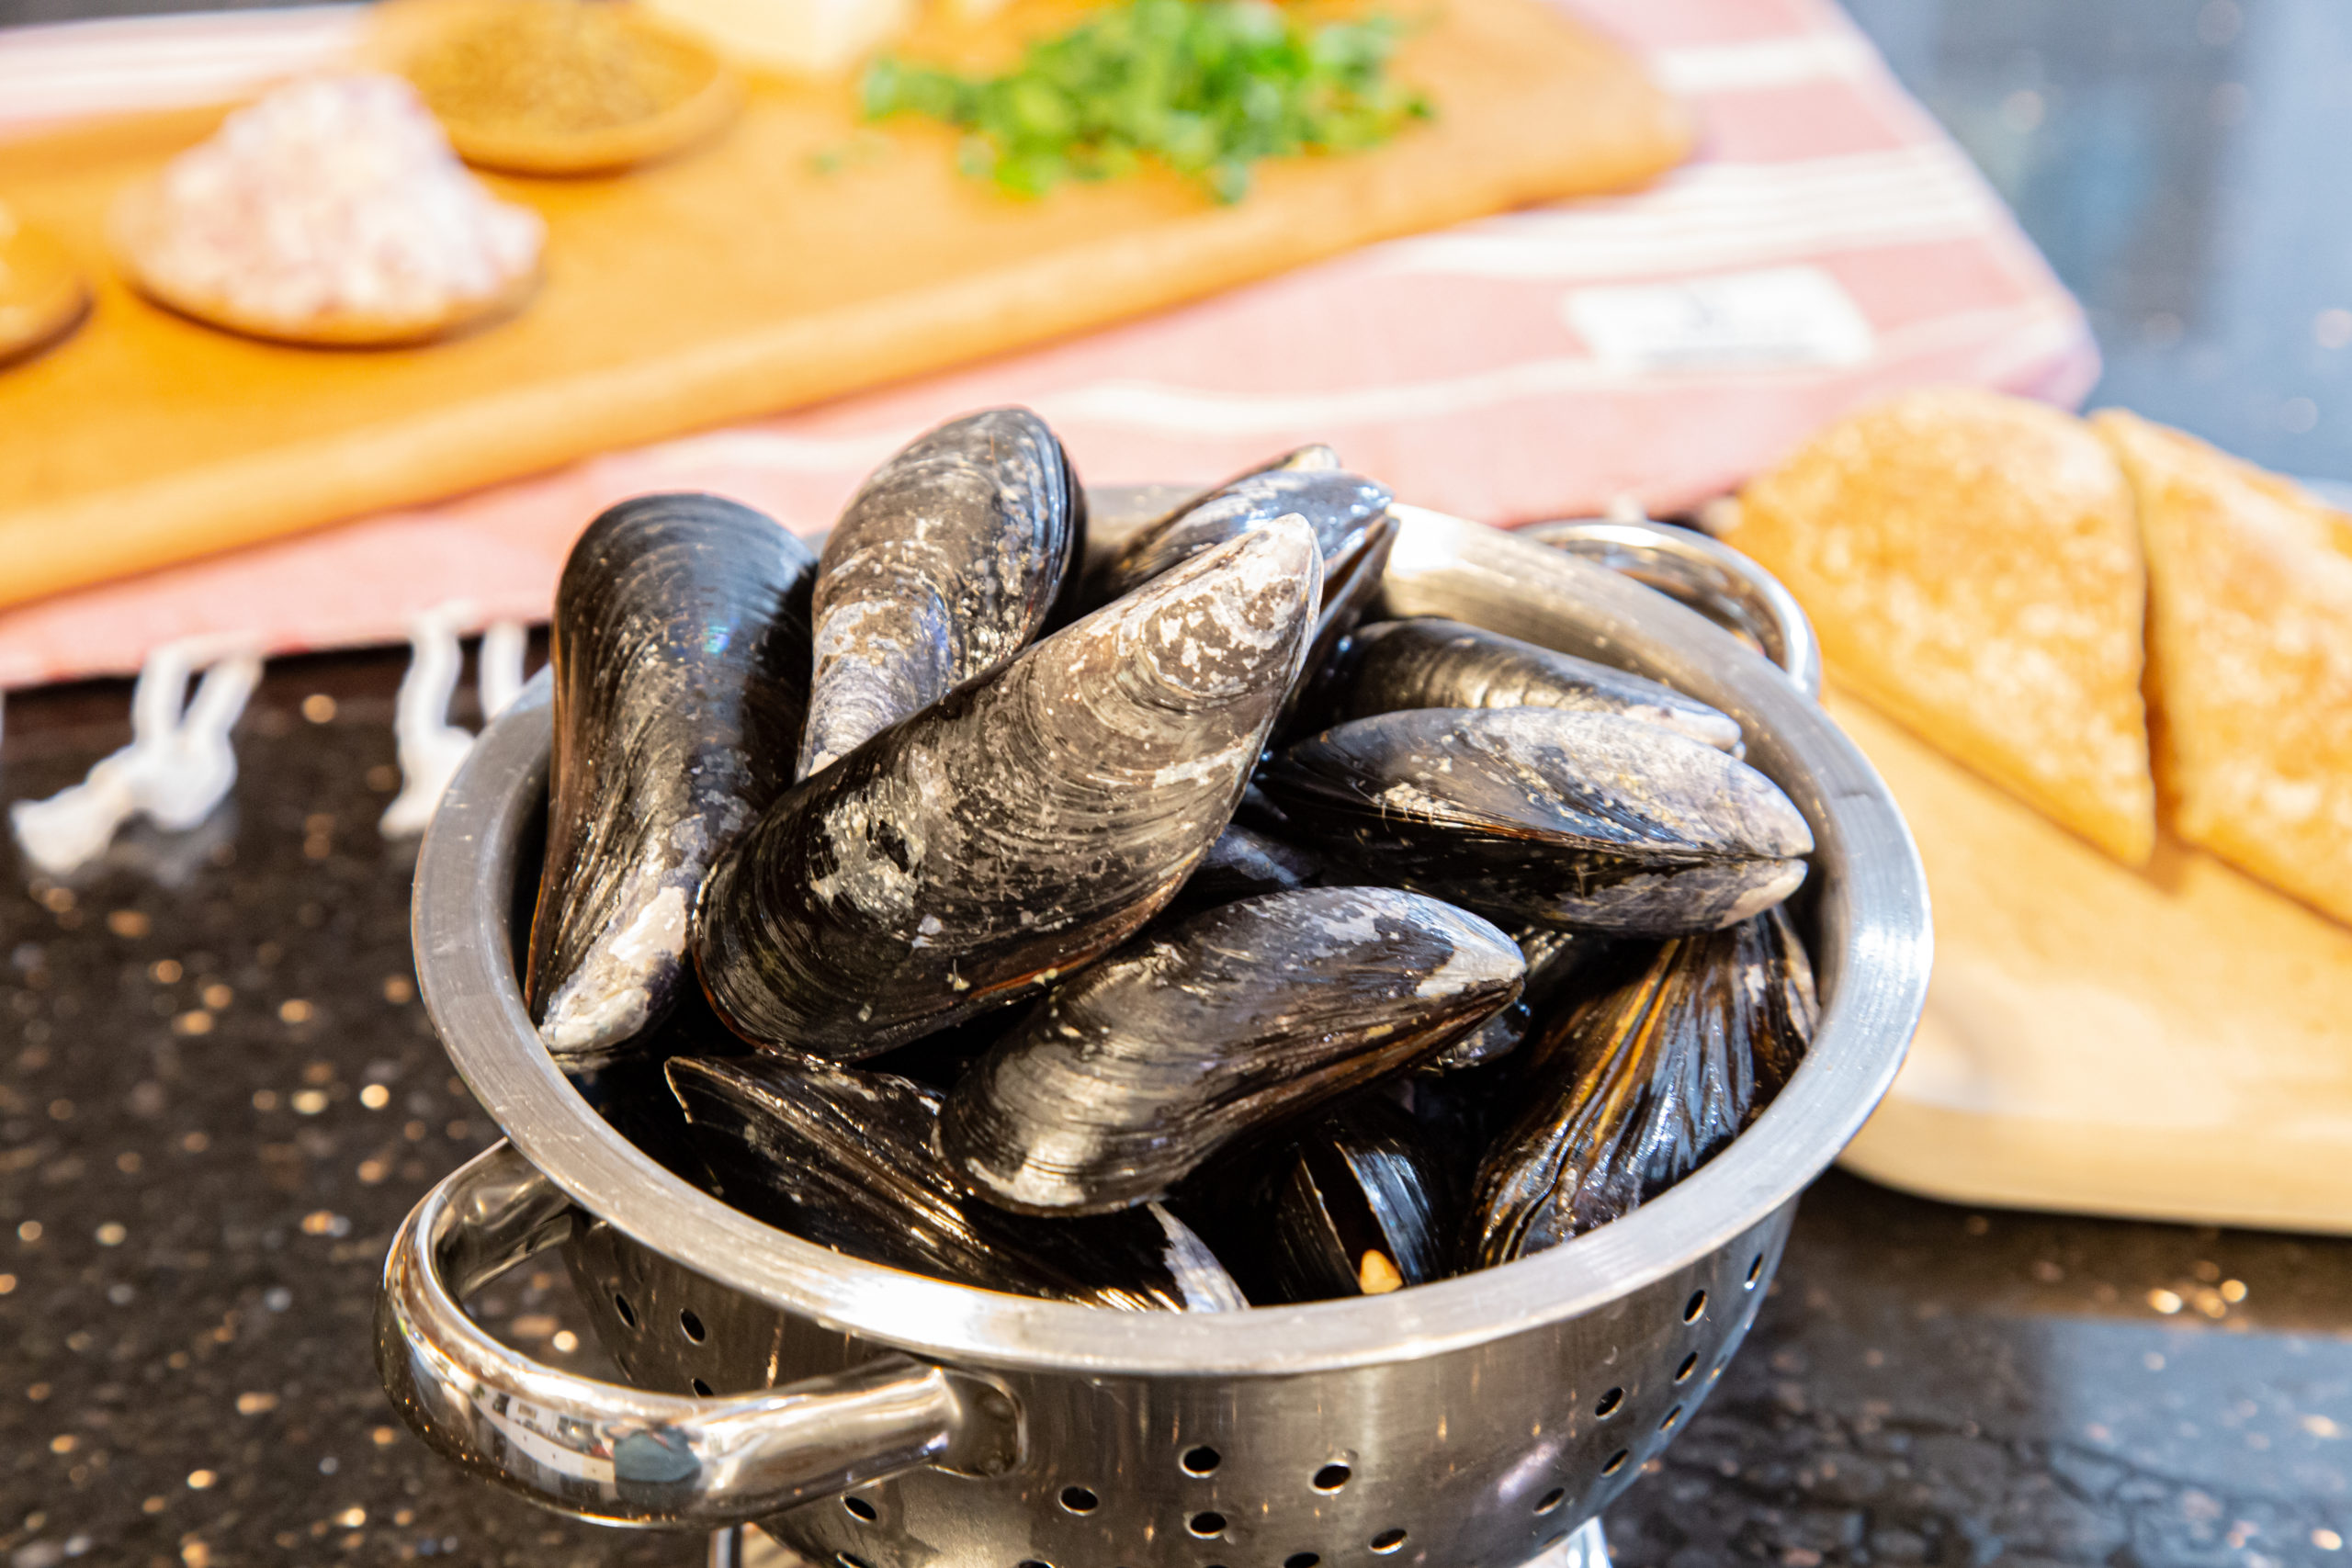 Mussels in a collander.